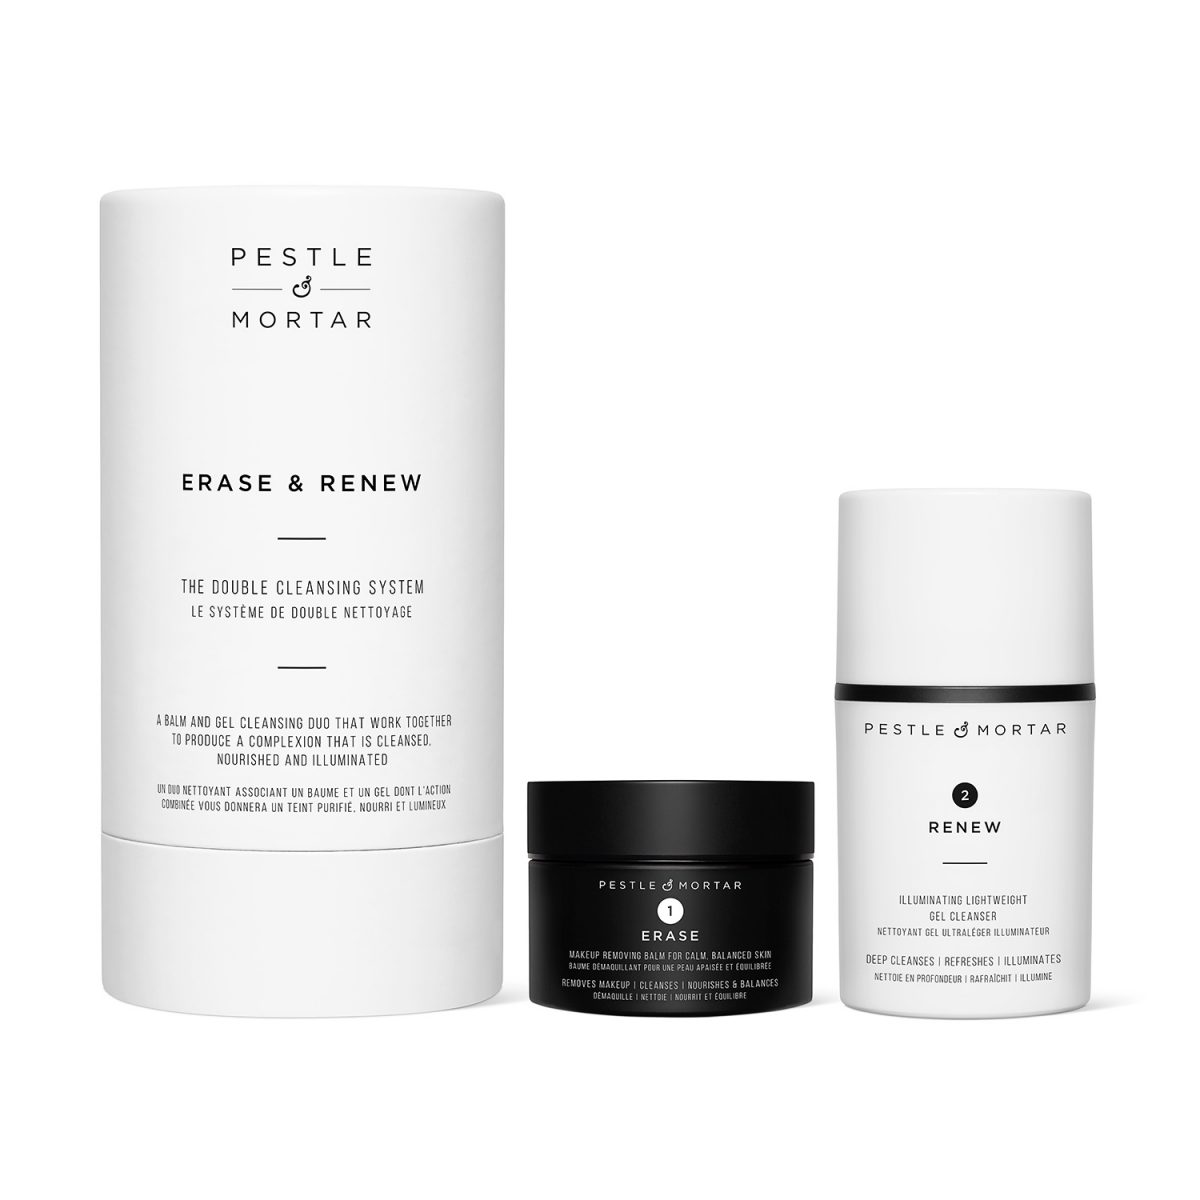 Pestle and Mortar Erase and Renew- The double cleansing system